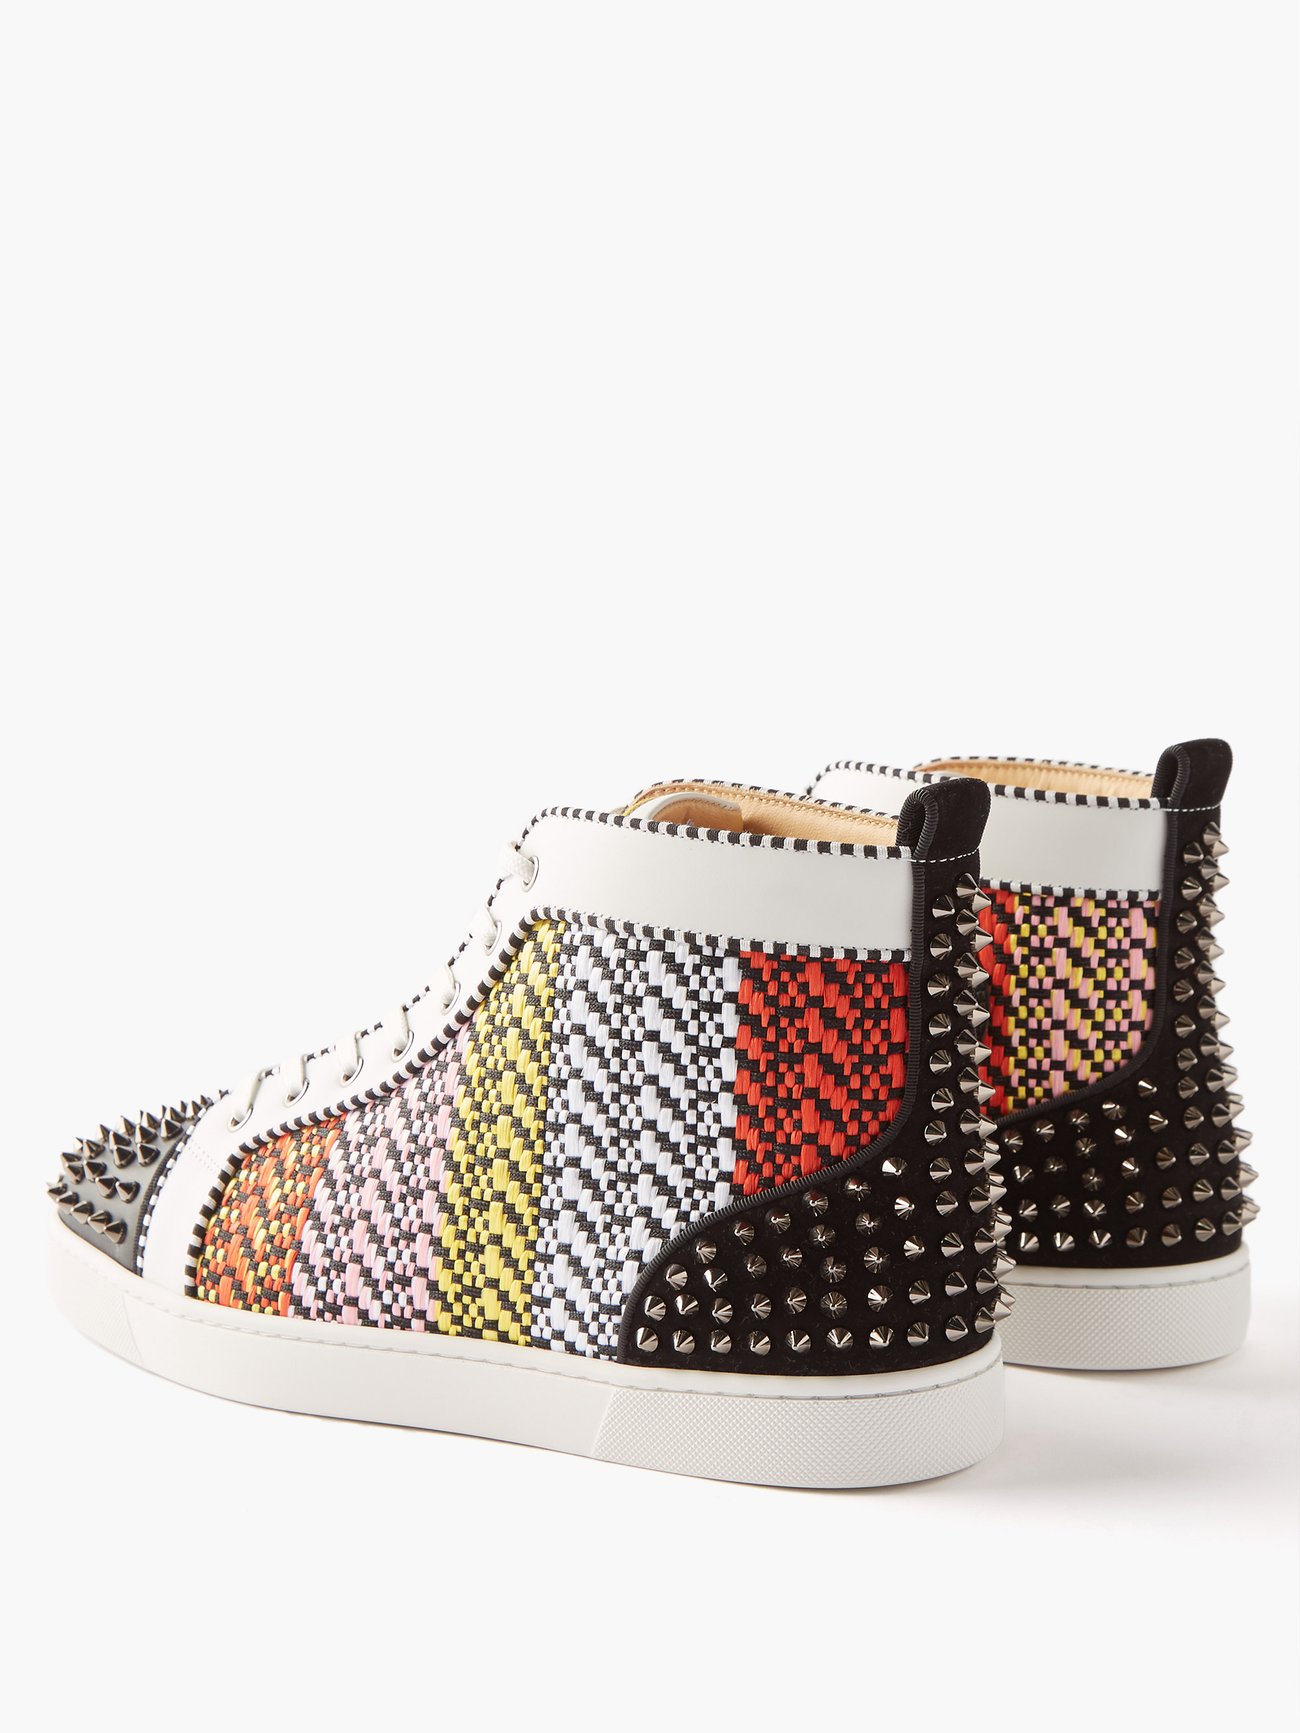 Christian Louboutin Galaxtitude Suede High-top Trainers in Red for